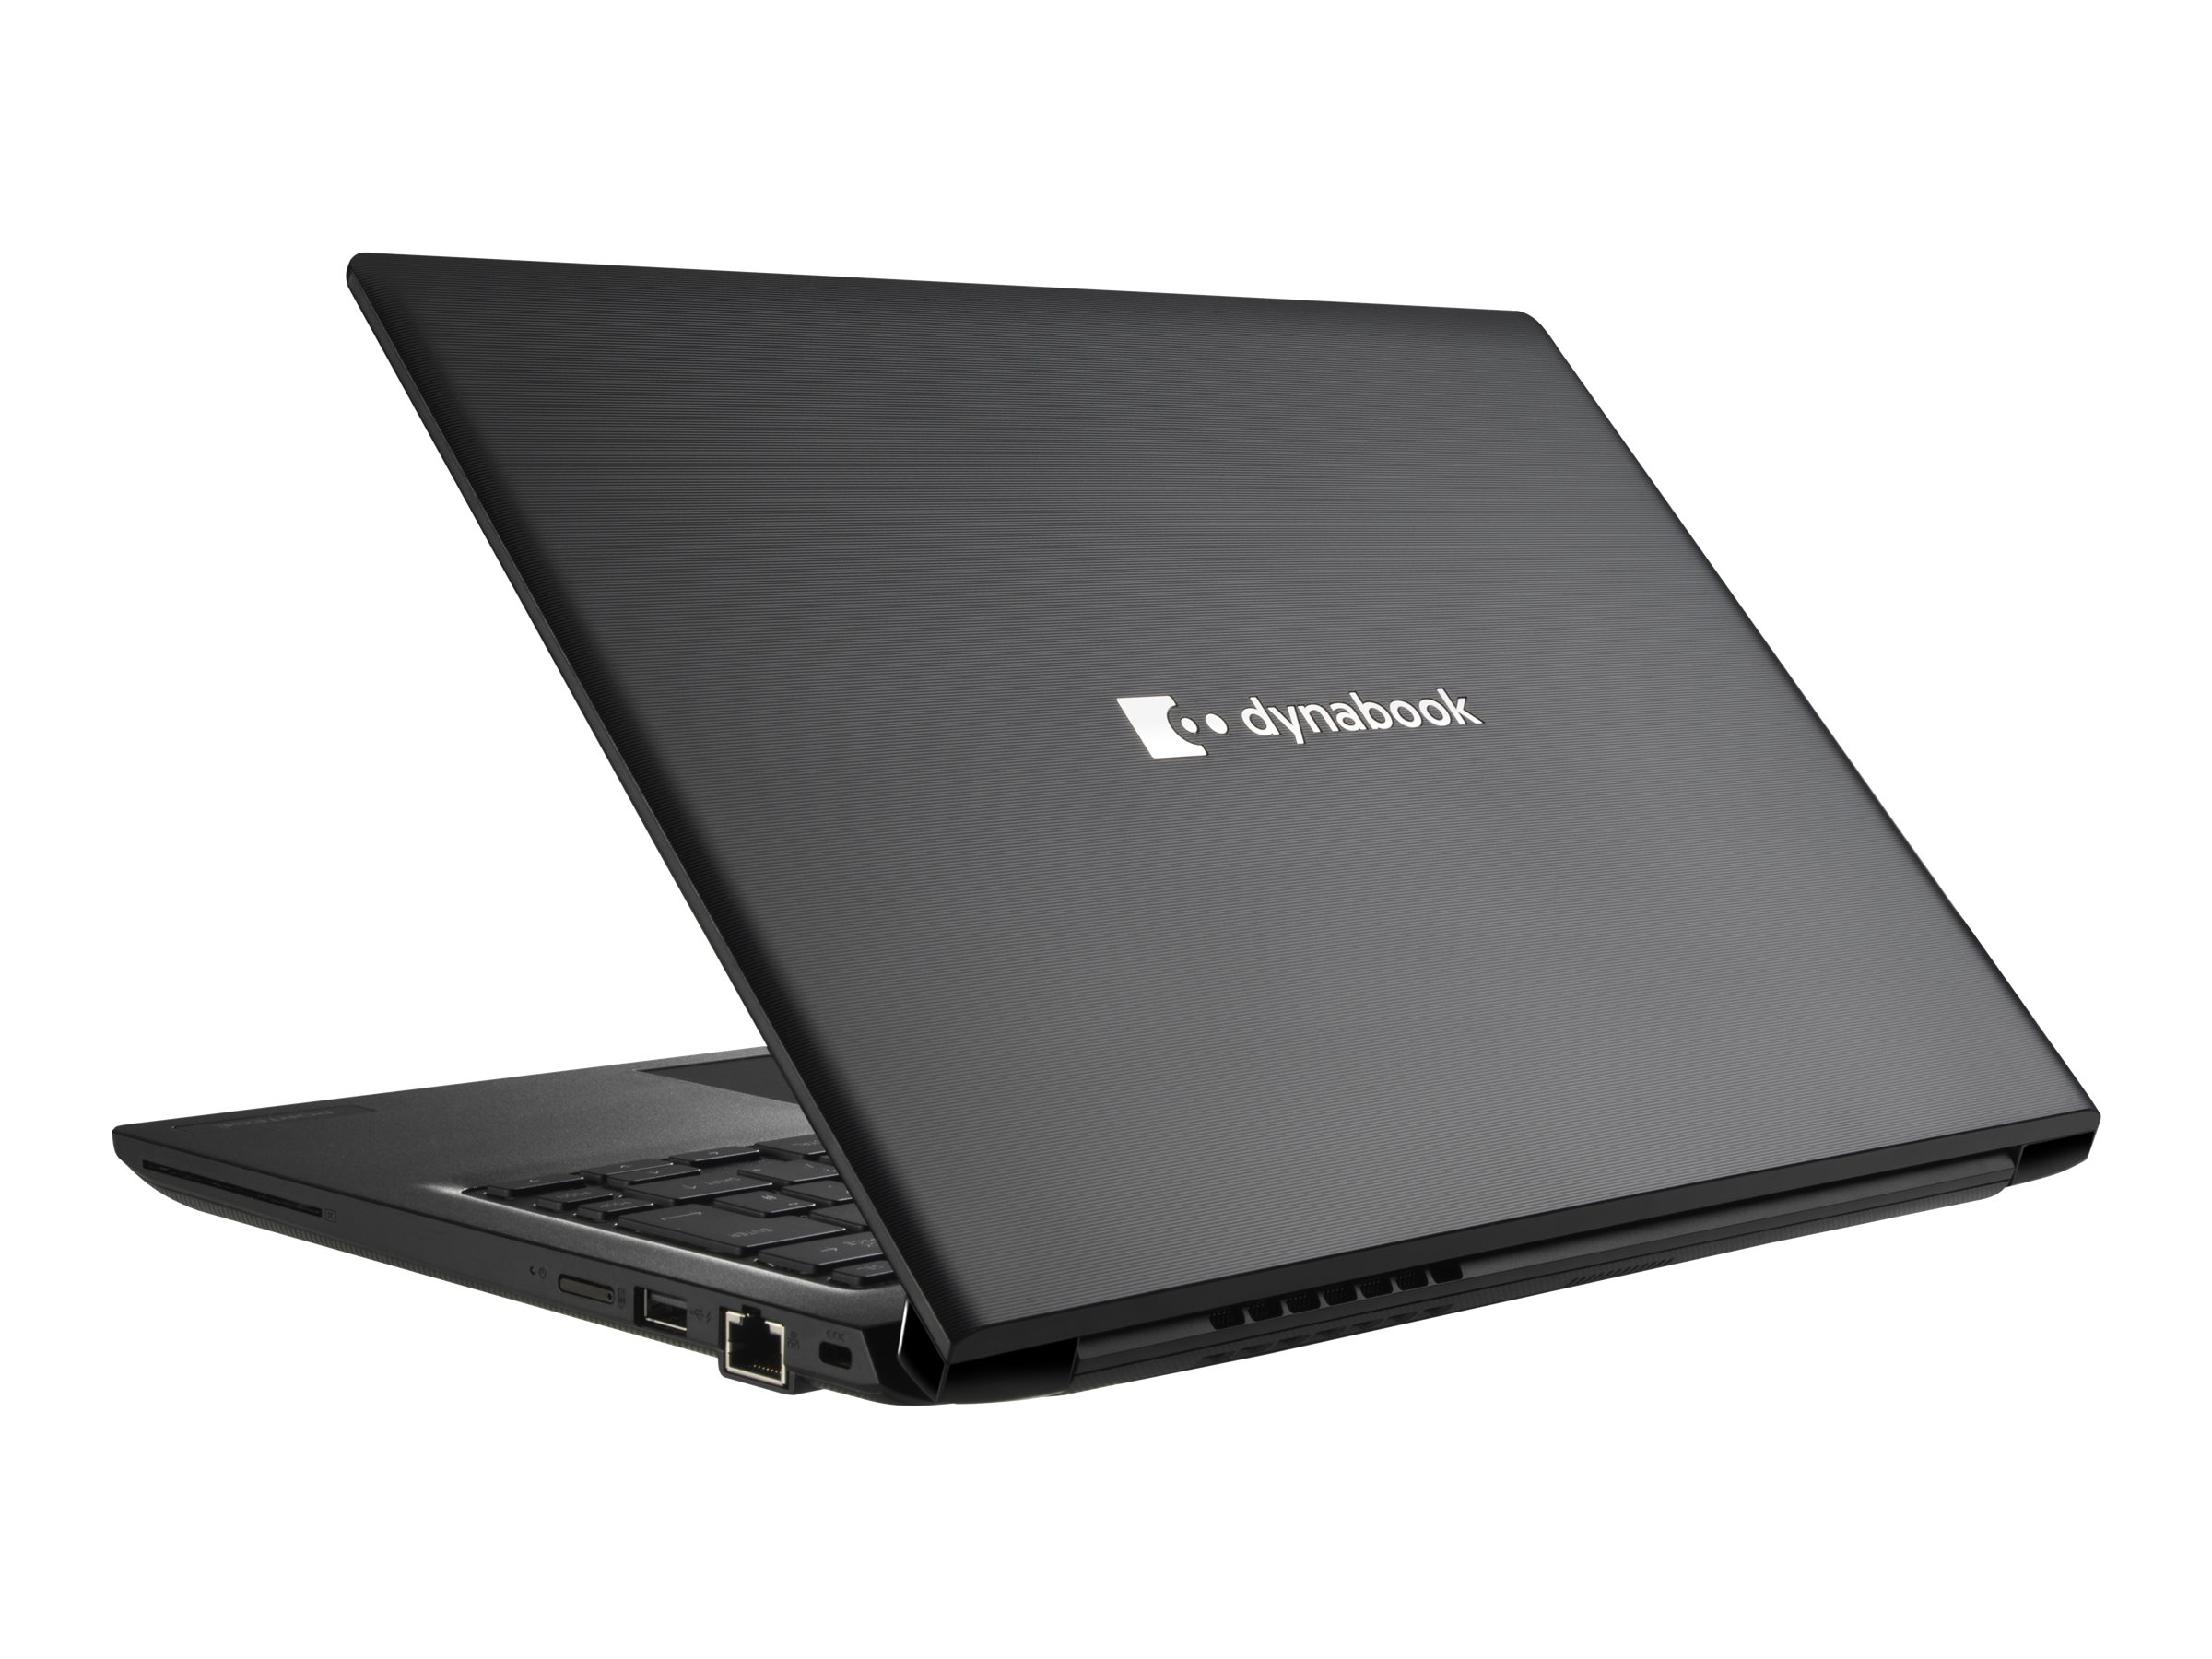 Dynabook Toshiba Tecra A50 (J) - full specs, details and review